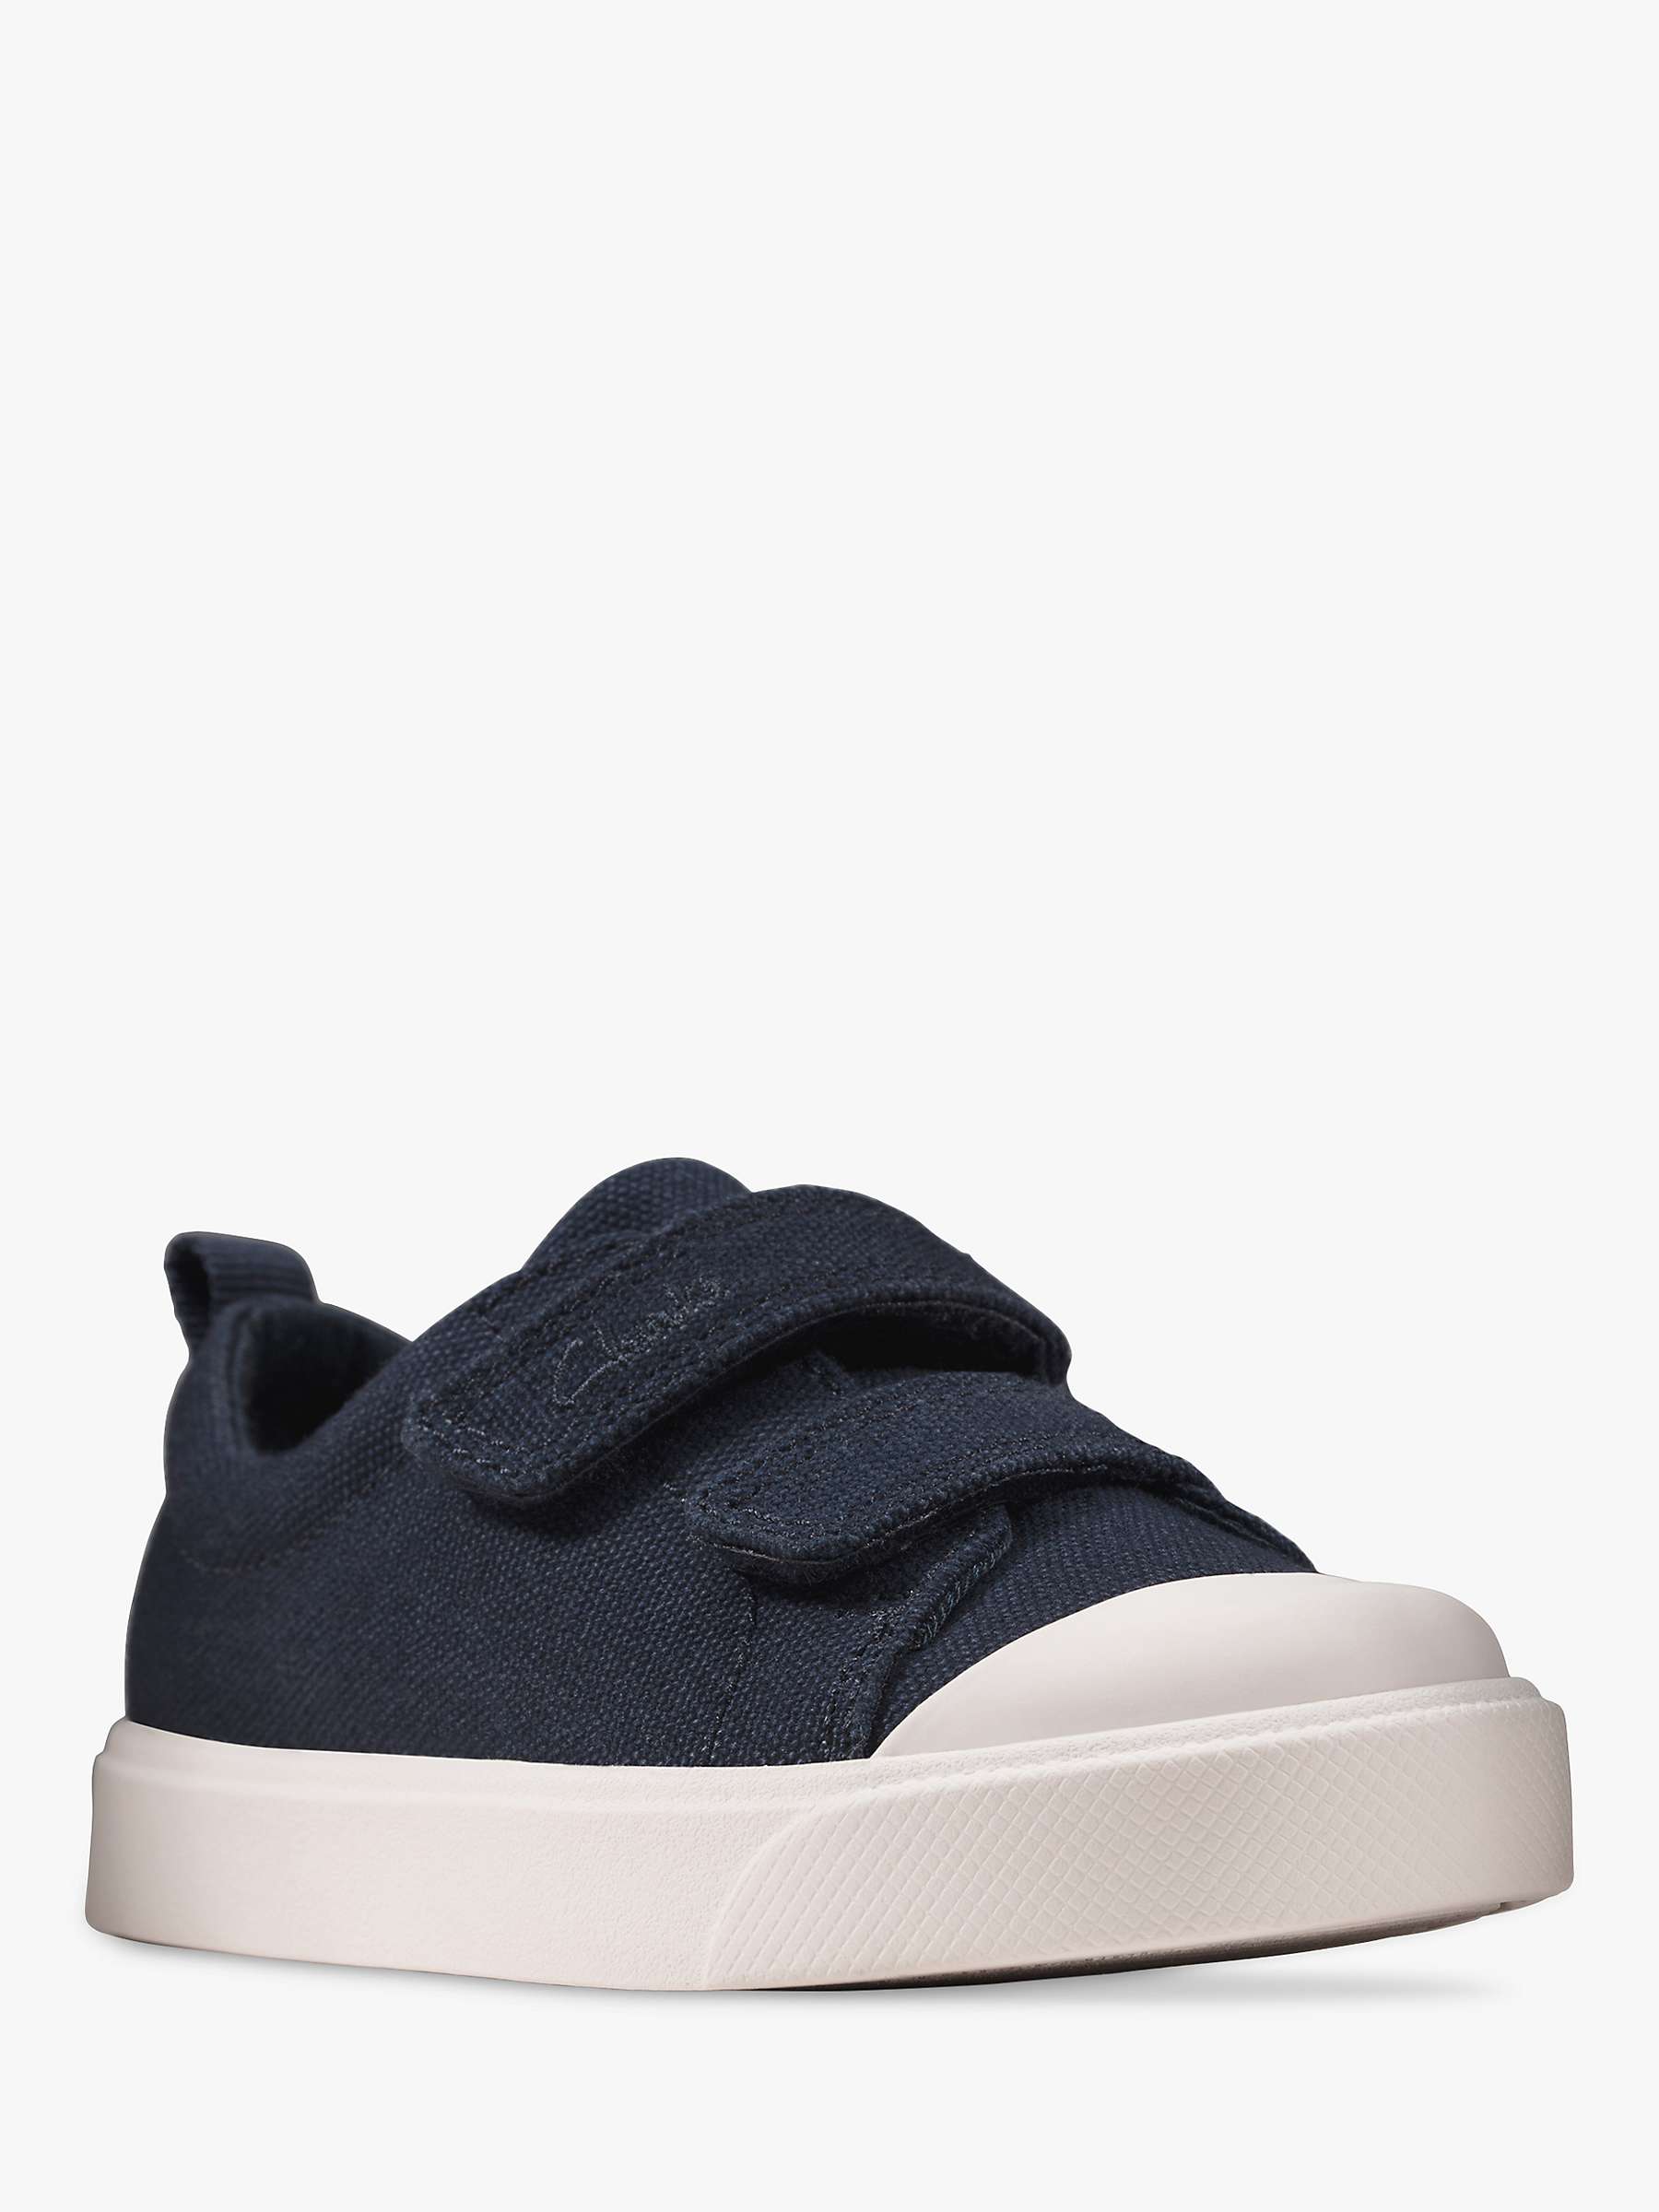 Buy Clarks Kids' City Bright Riptape Trainers Online at johnlewis.com